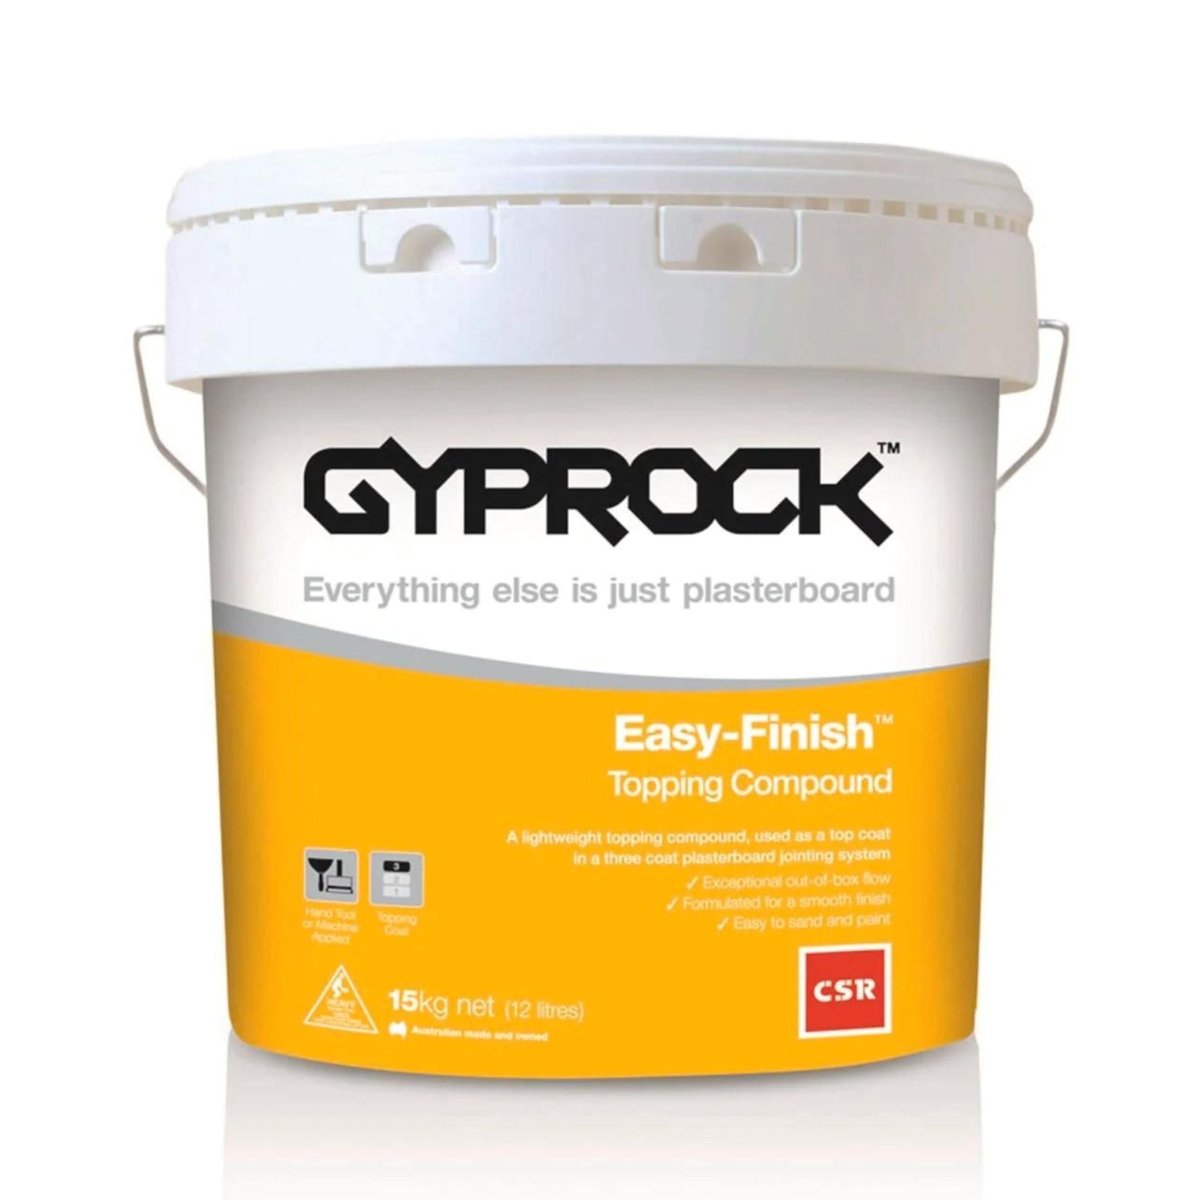 CSR Gyprock Easy-Finish Topping Compound 15kg Bucket